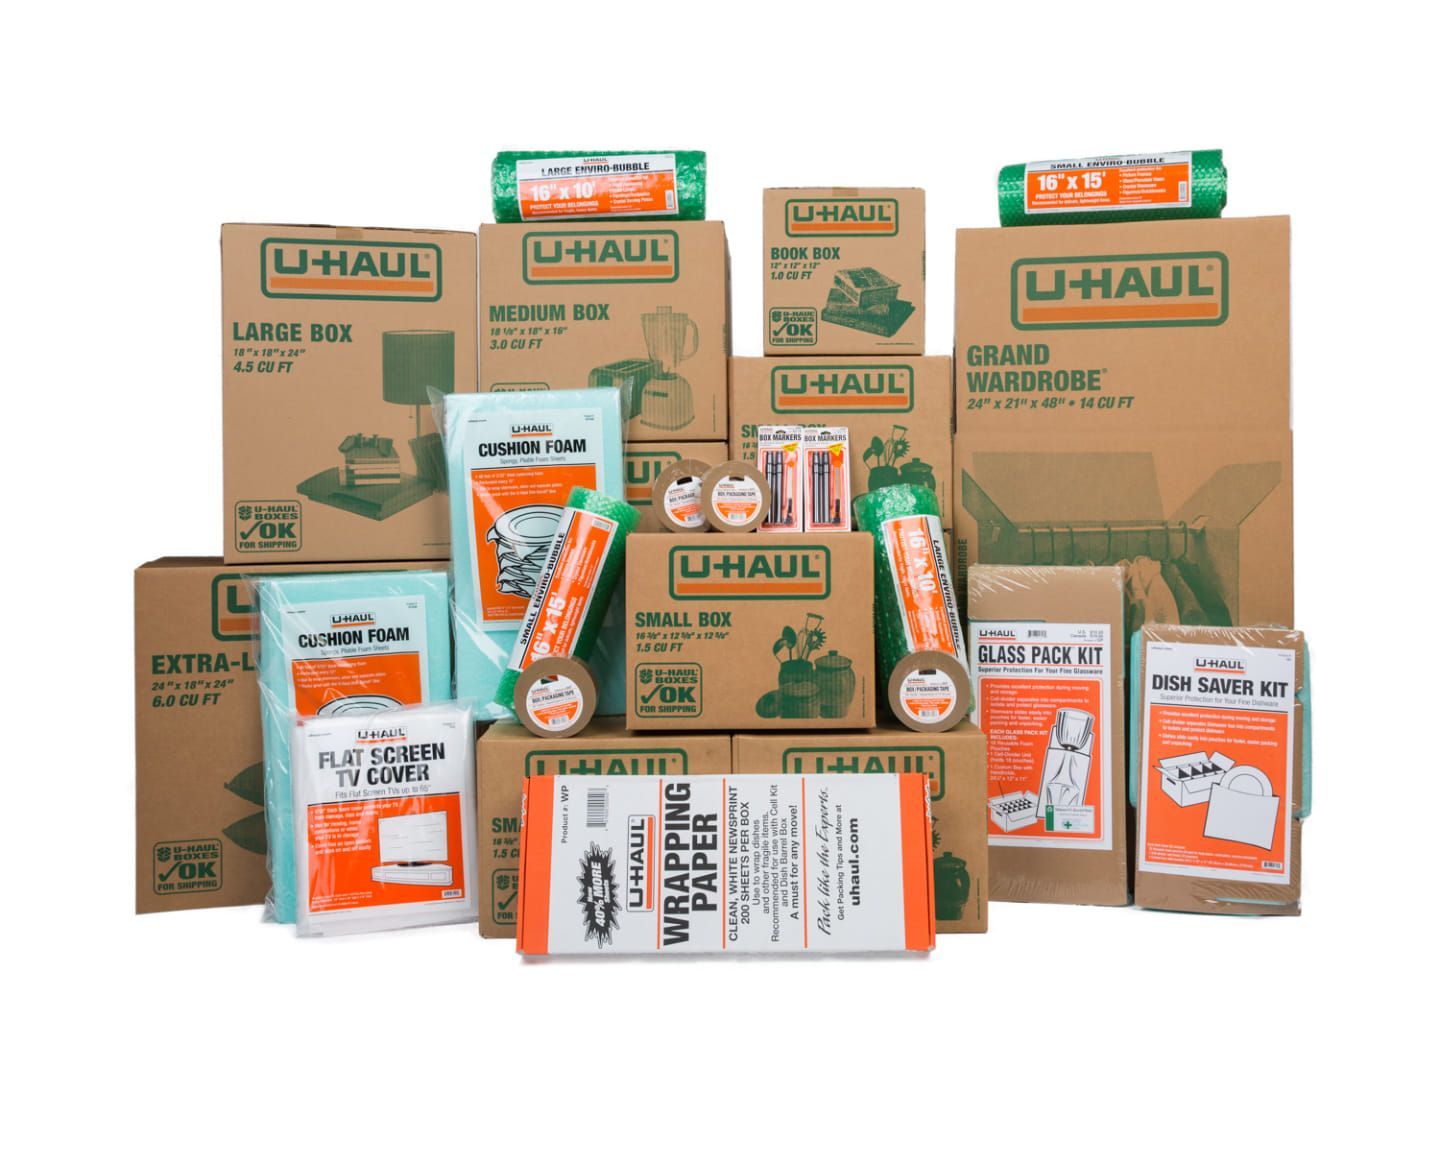 a bunch of boxes with u-haul written on them